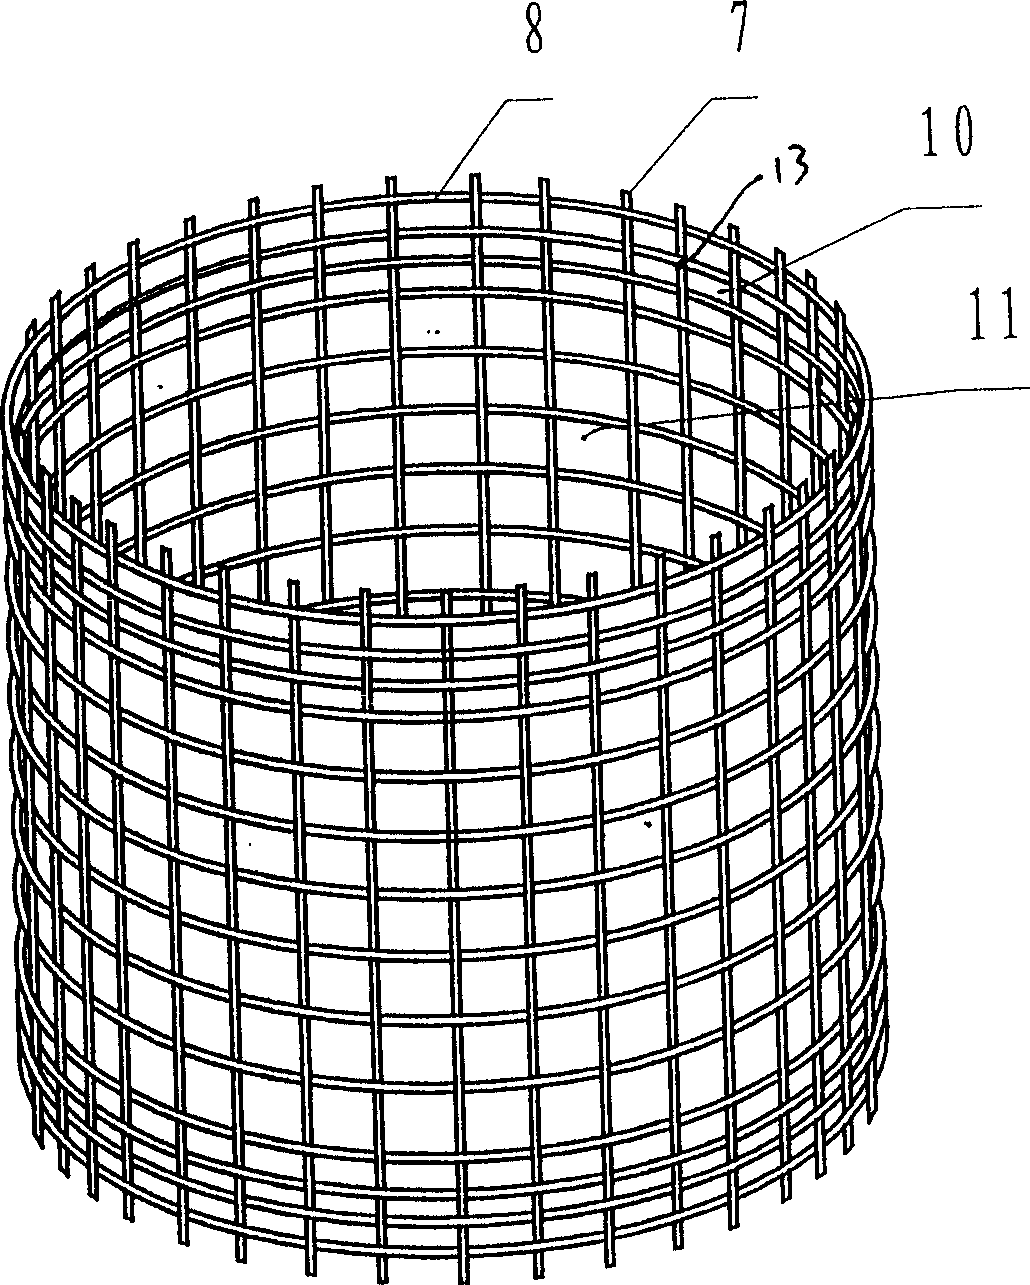 Grid absorbing ring for compact spinning and its weaving method